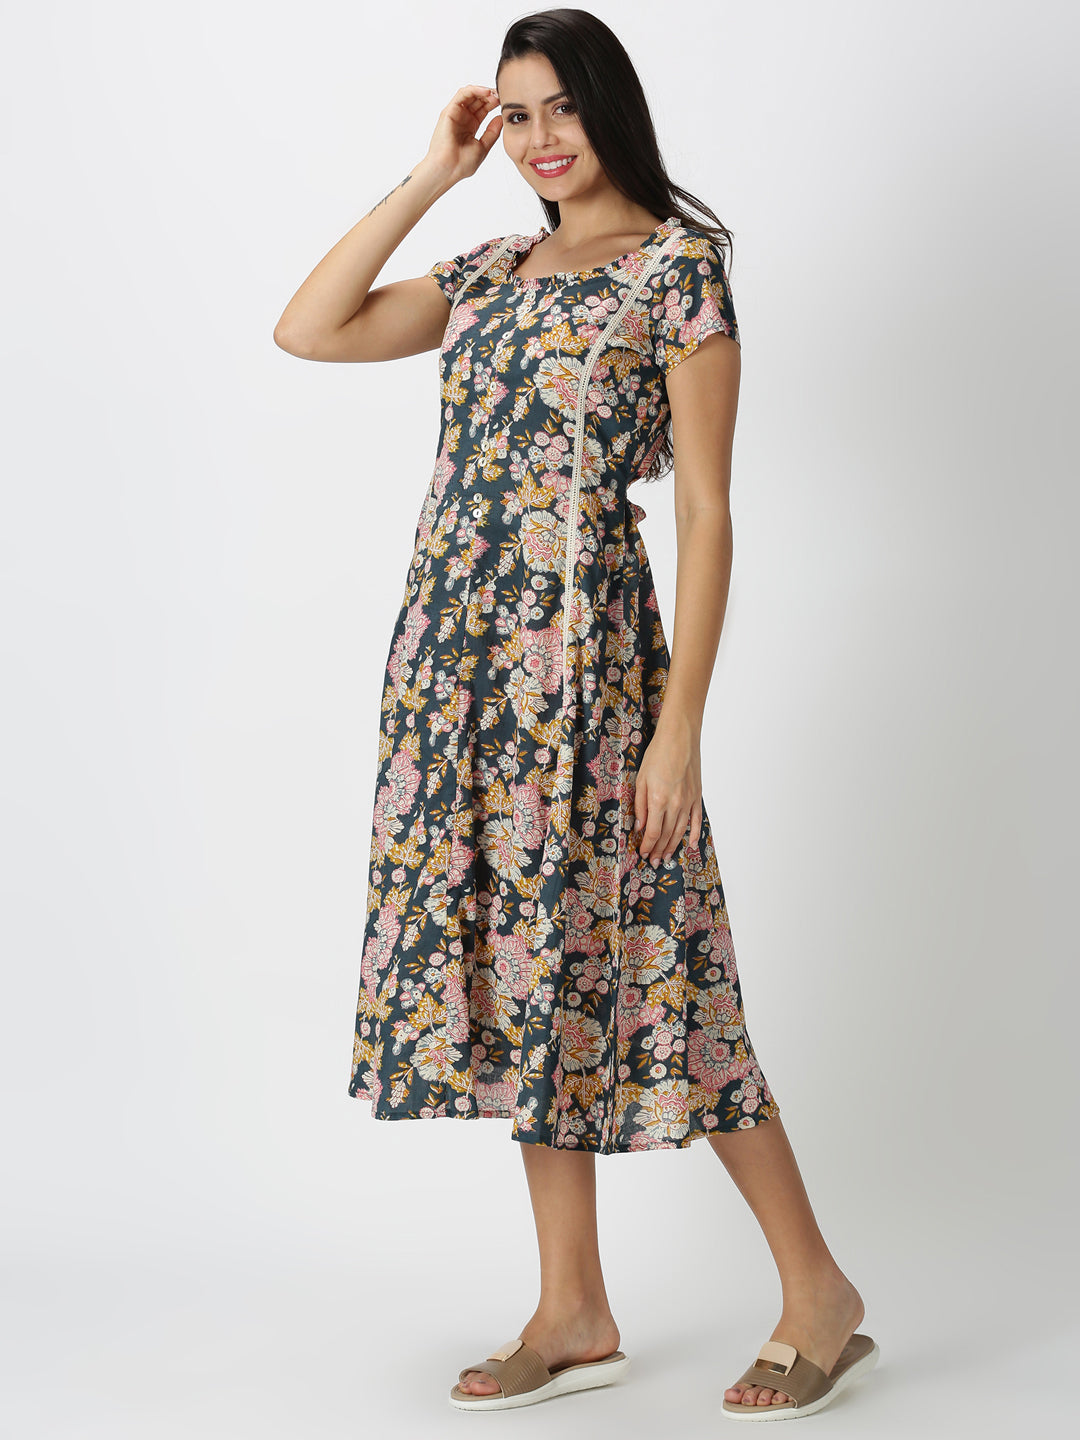 Charcoal Grey Floral Printed Midi Dress with Waist Tie-up